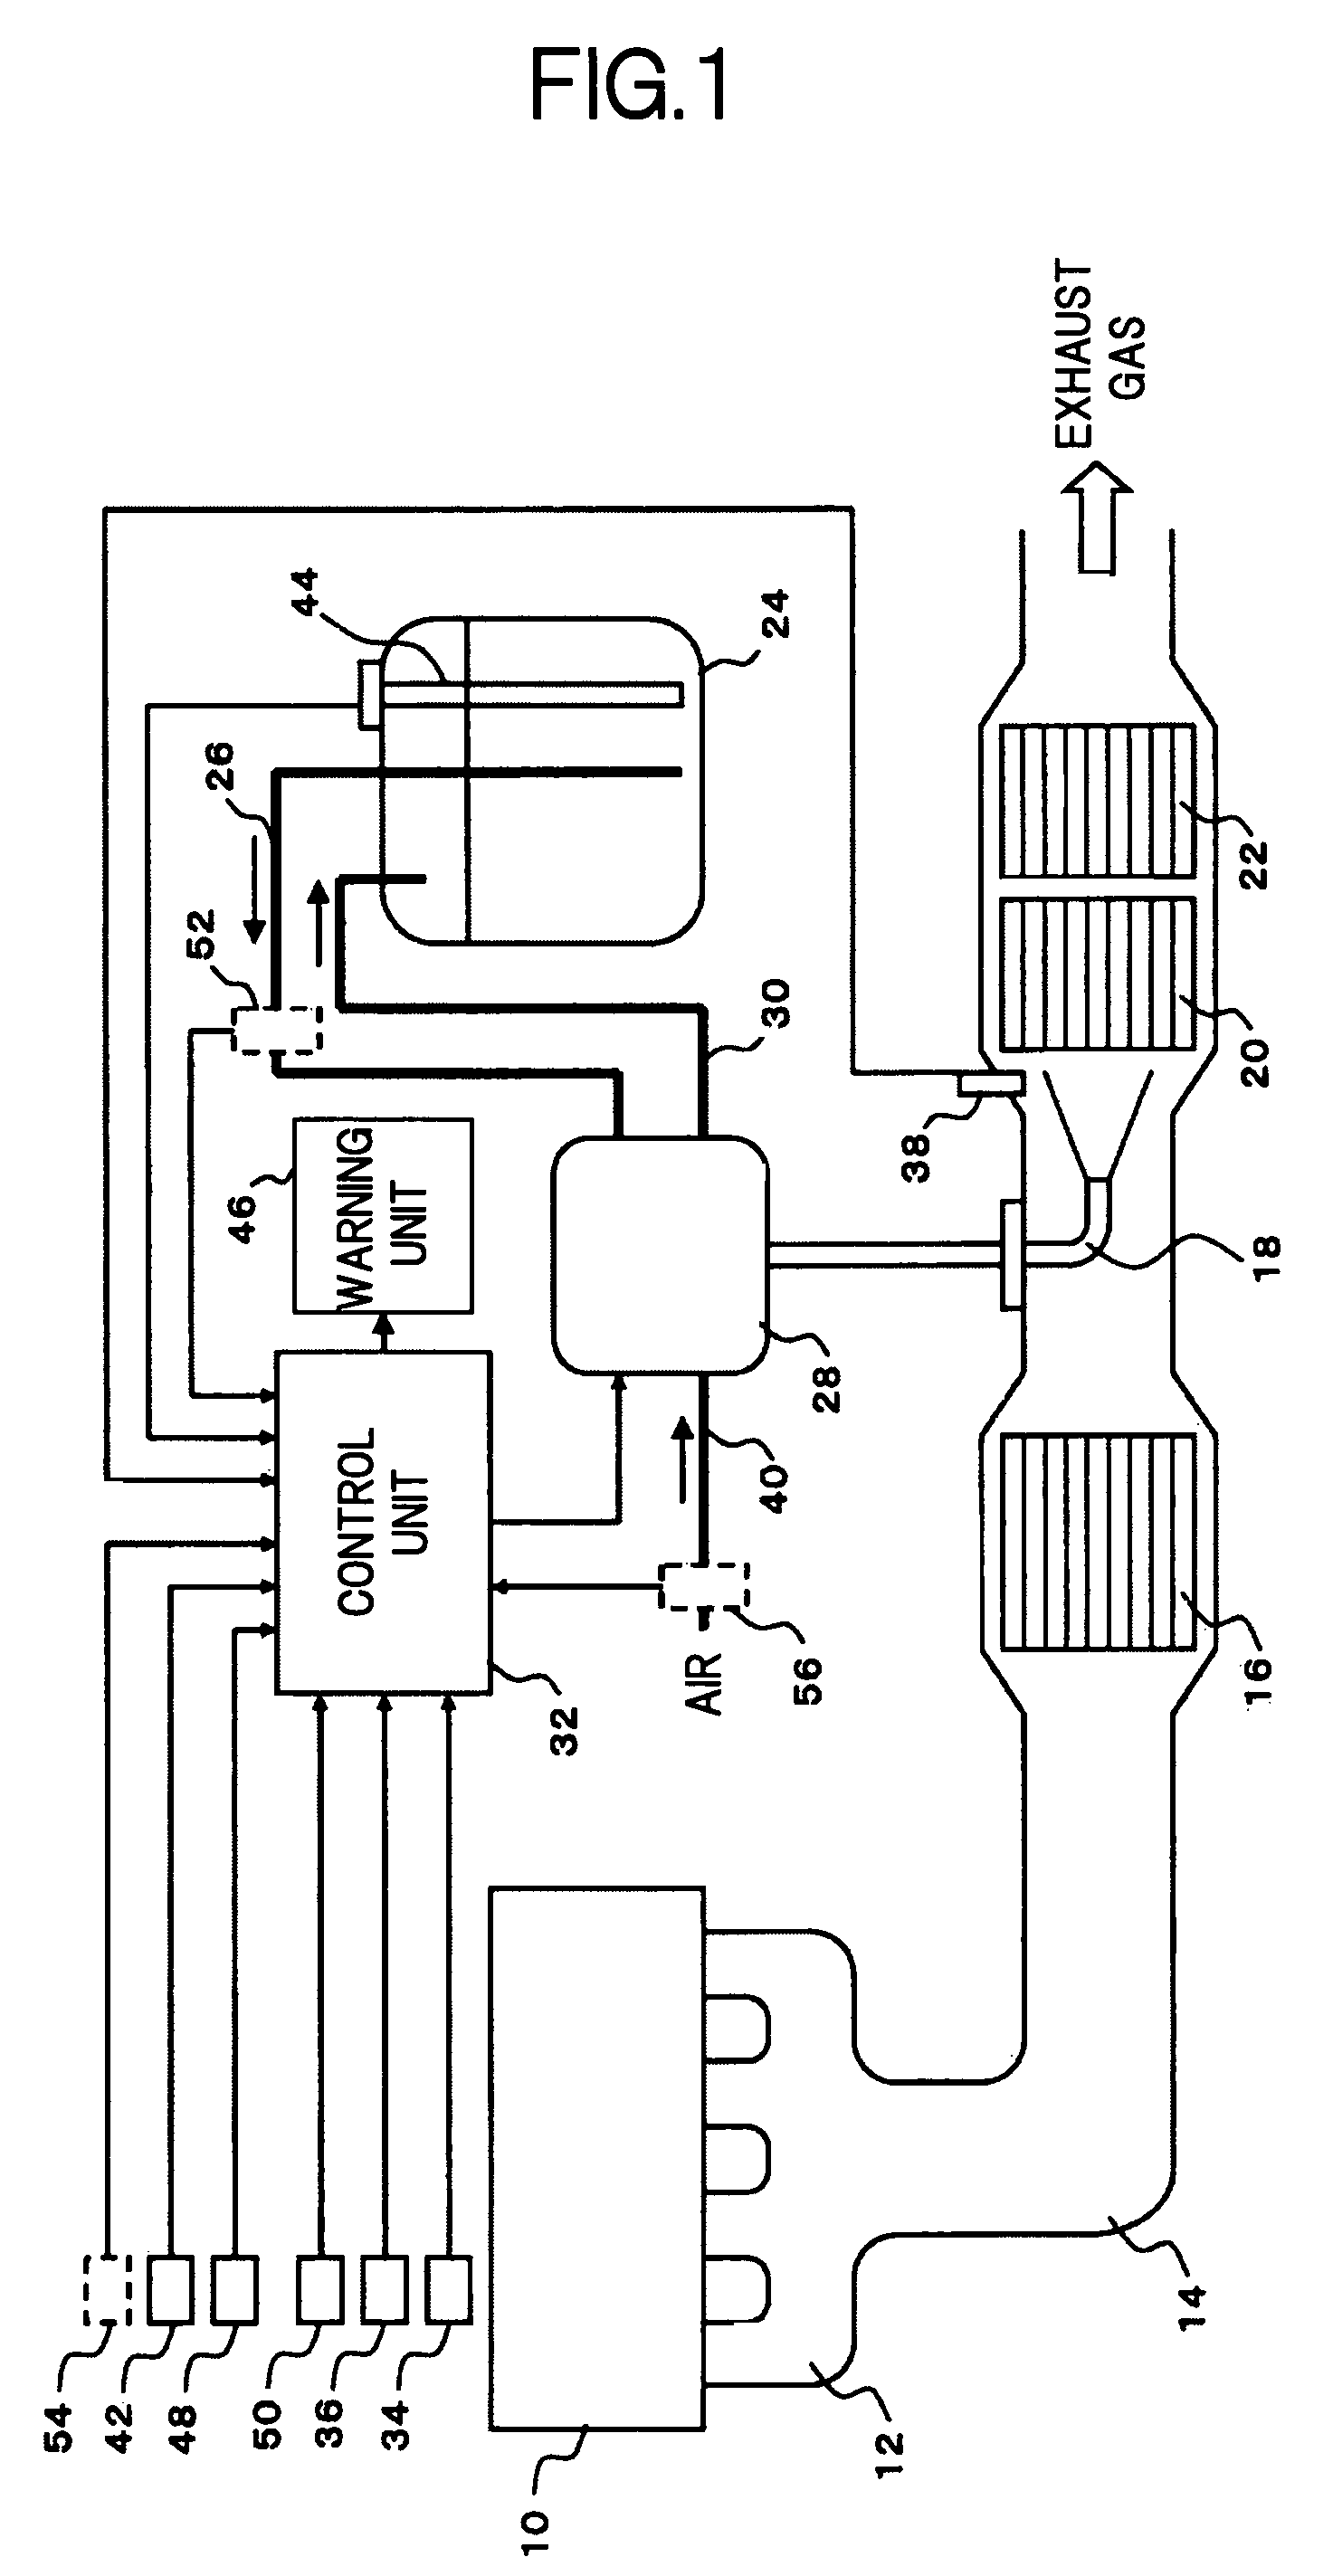 Apparatus for judging condition of injection of reducing agent incorporated in exhaust gas purification system